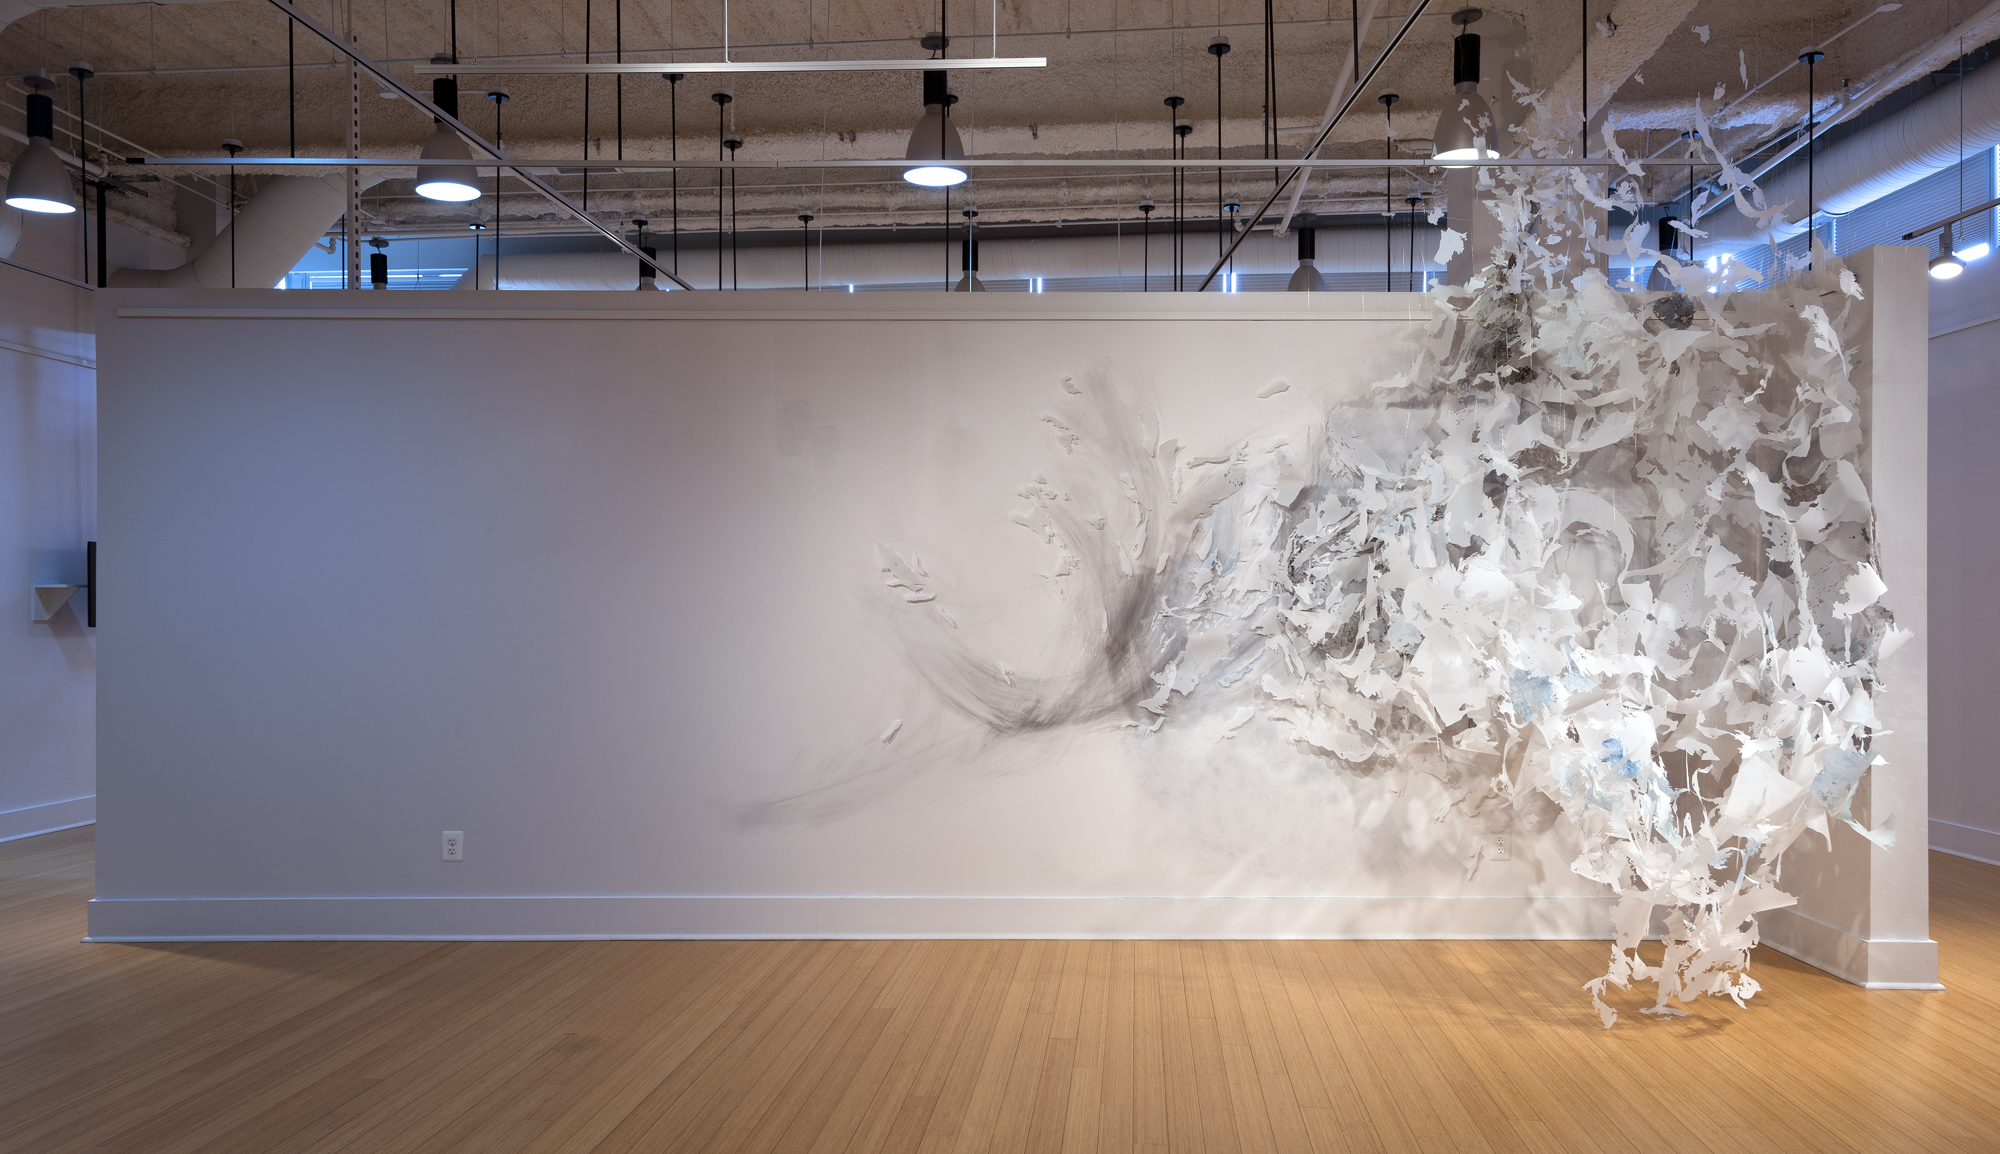  Untitled  2015, mixed-media, approx. 15'w x 15'h x 5'd  Iterations, Installation at VisArts, Rockville    